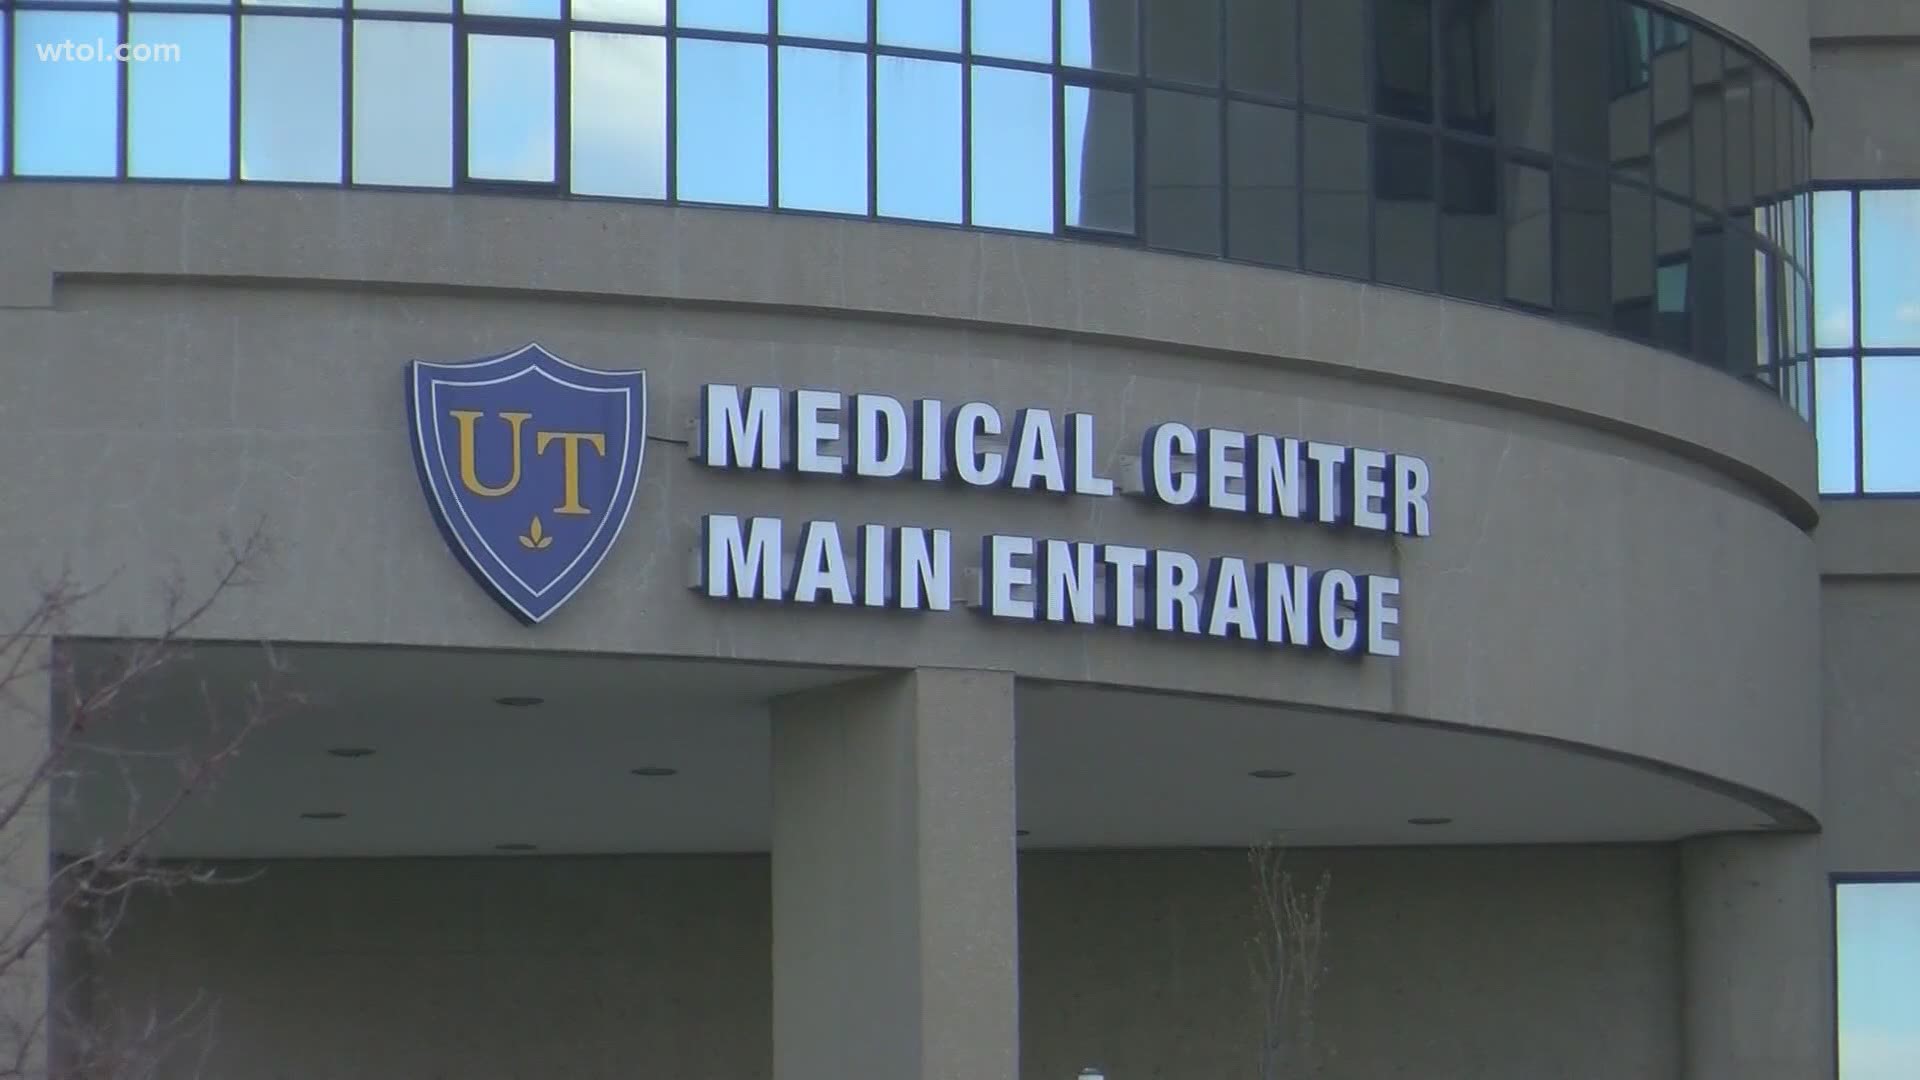 The university is no longer looking to sell or lease the University of Toledo Medical Center at this time.